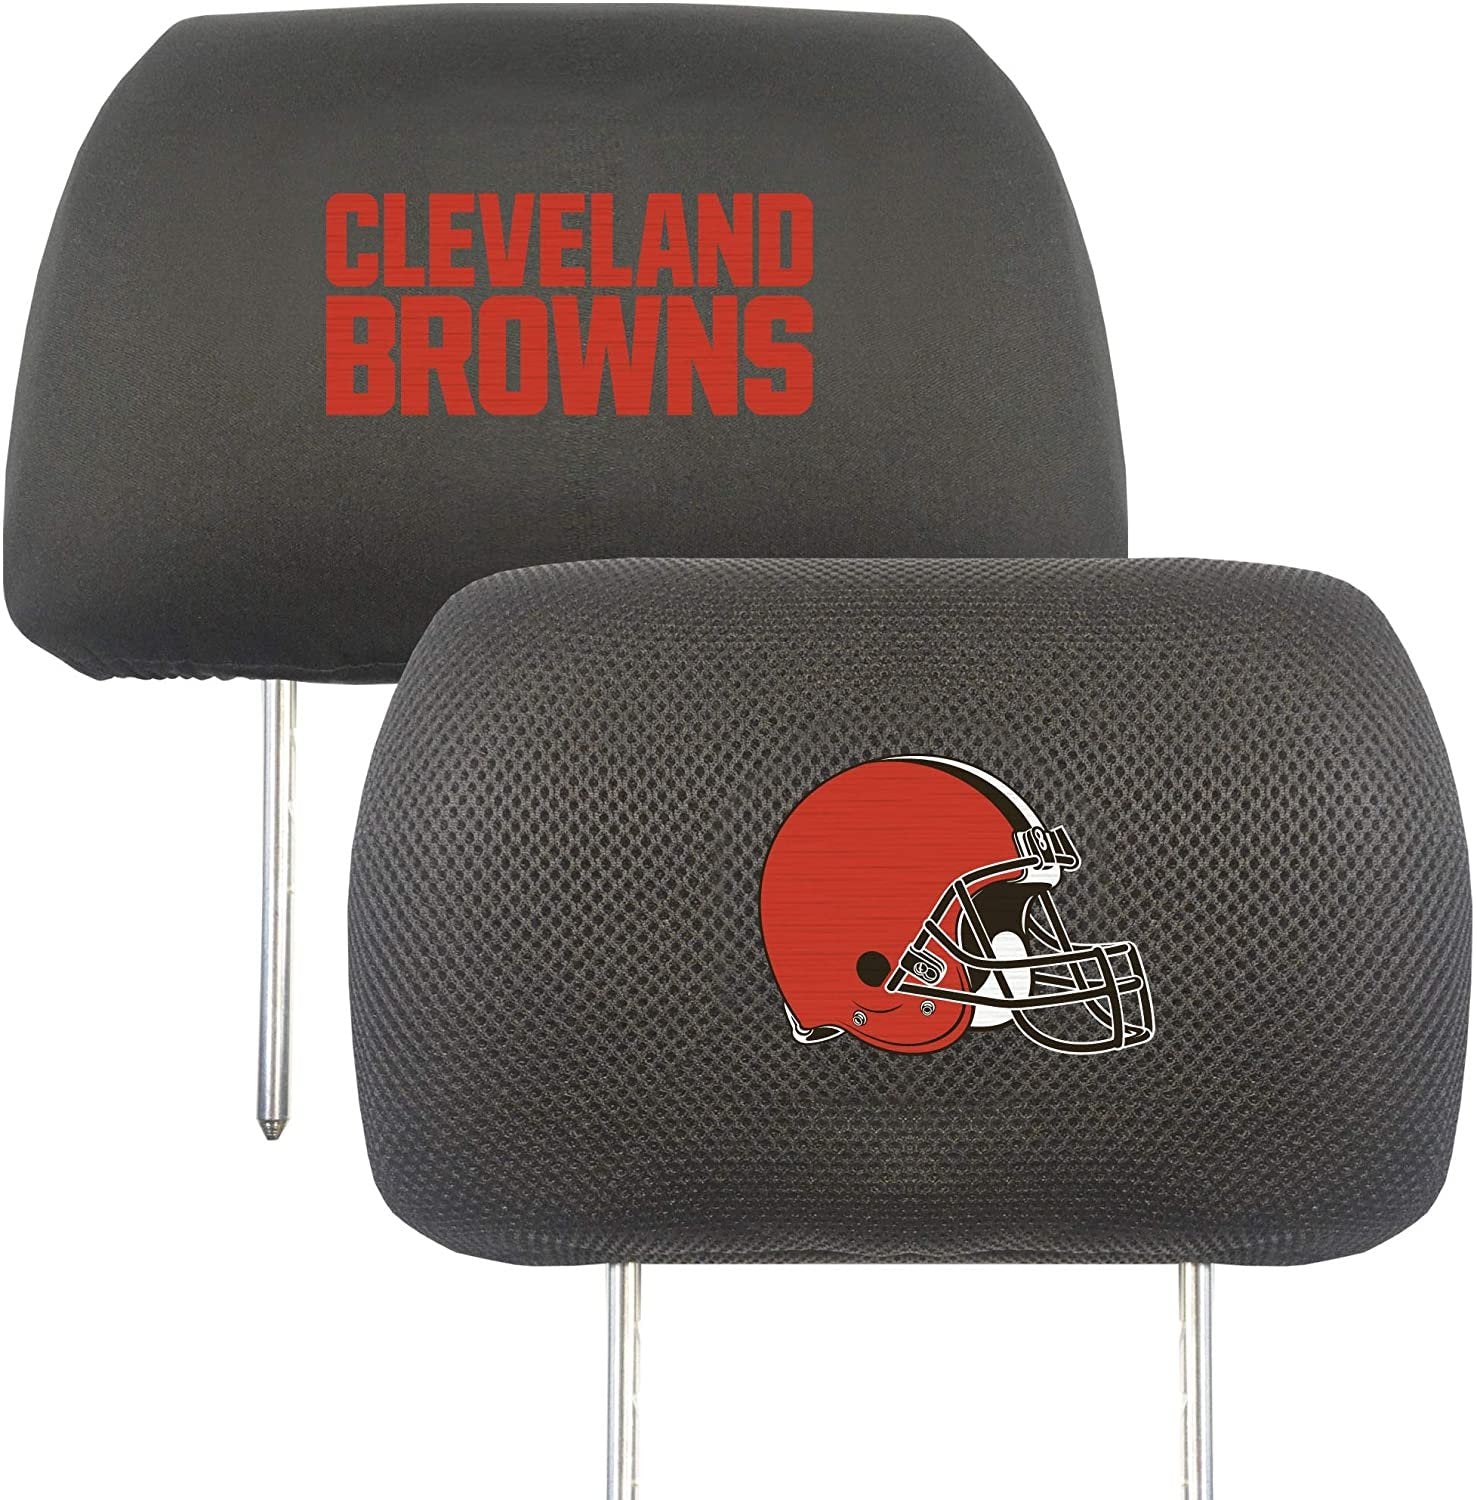 Cleveland Browns Pair of Premium Auto Head Rest Covers, Embroidered, Black Elastic, 14x10 Inch